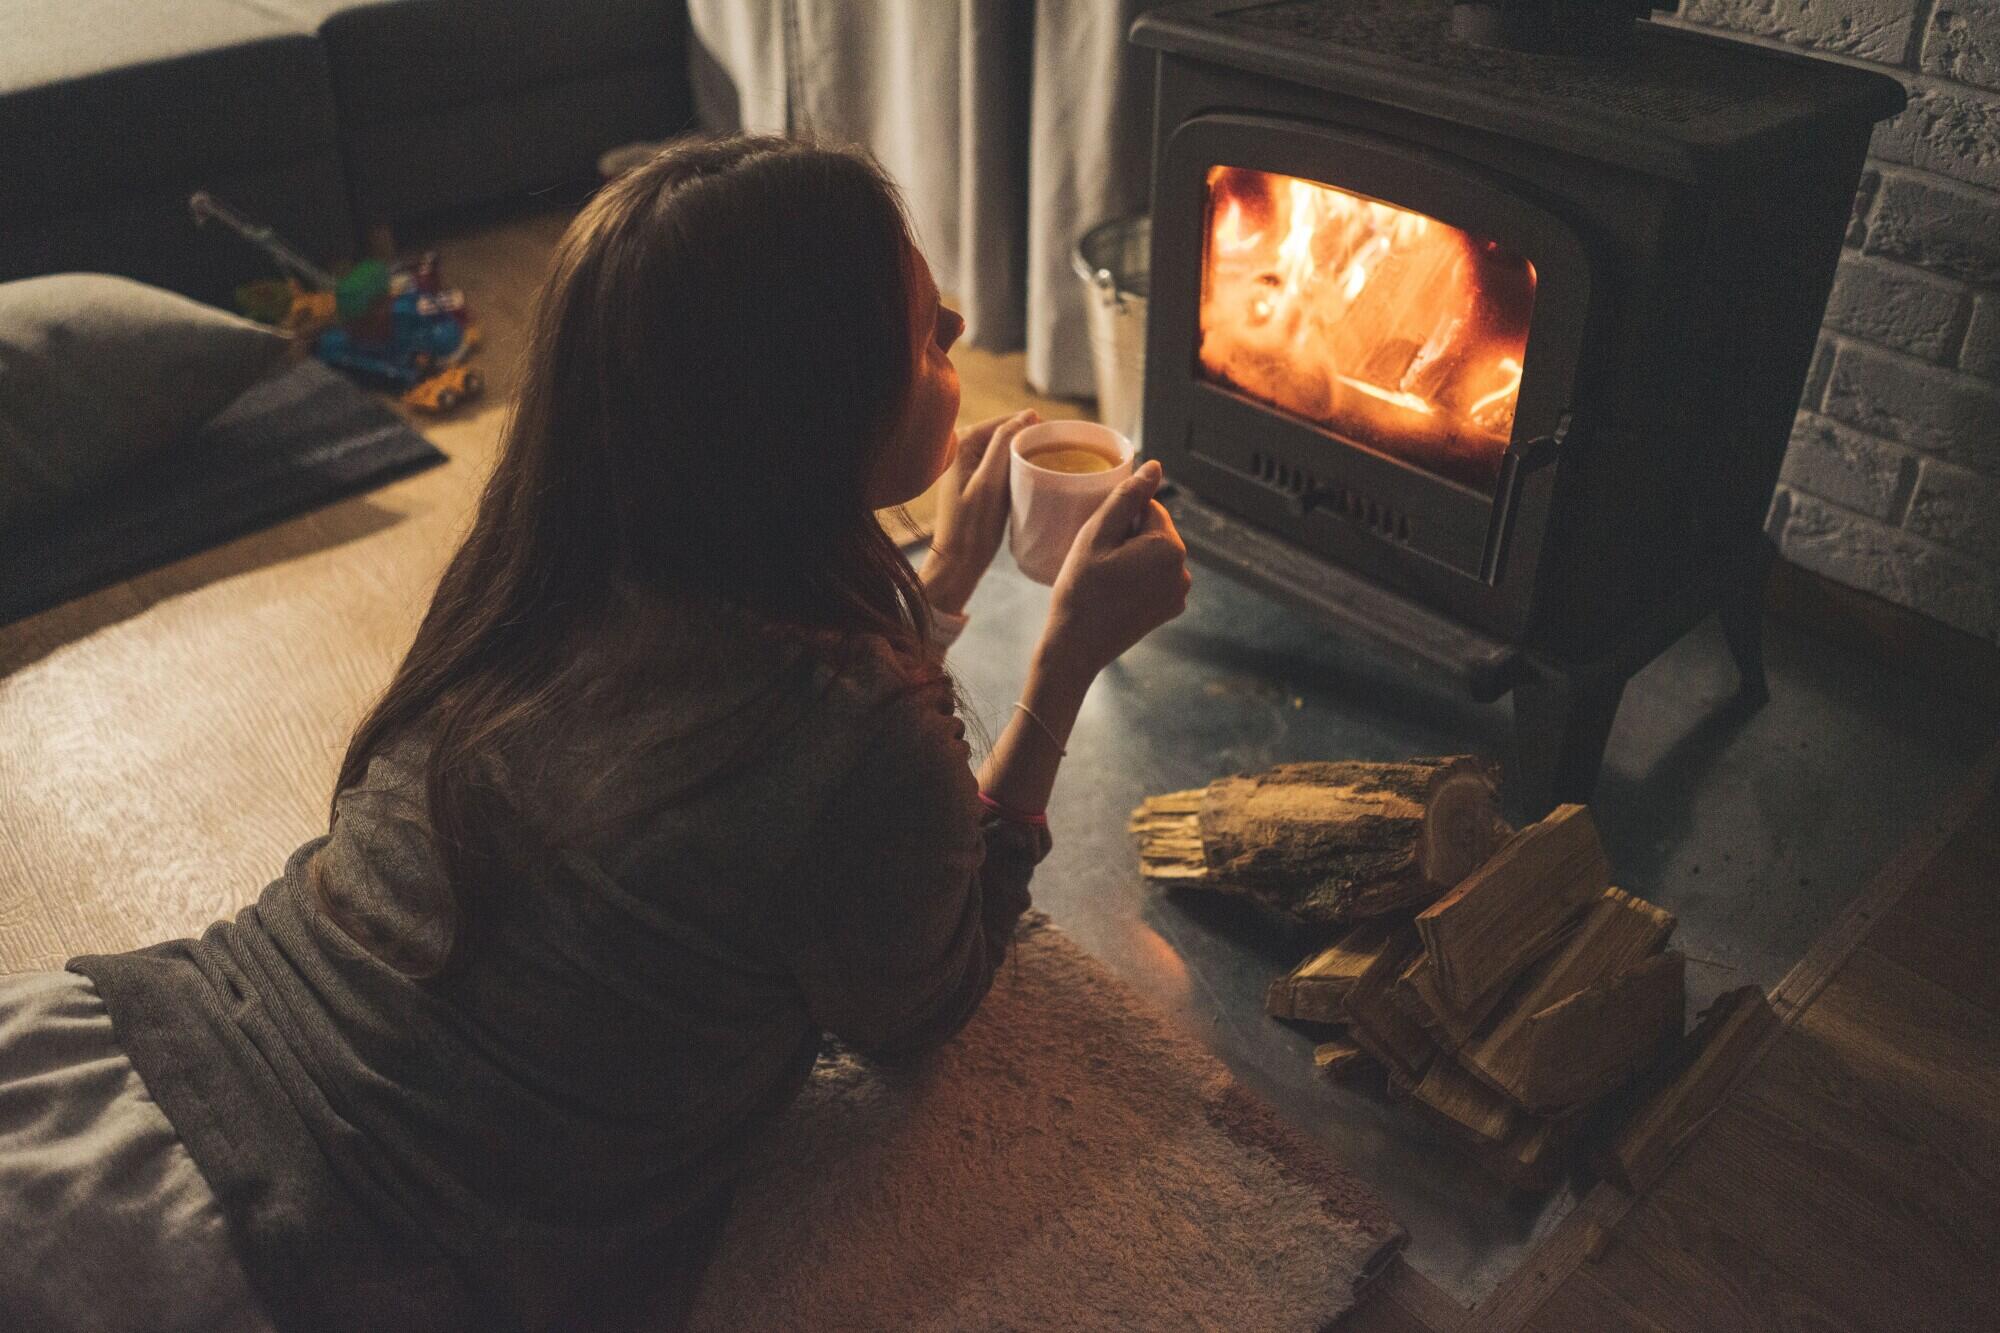 Survival Heating Methods to Use During Winter Power Outage